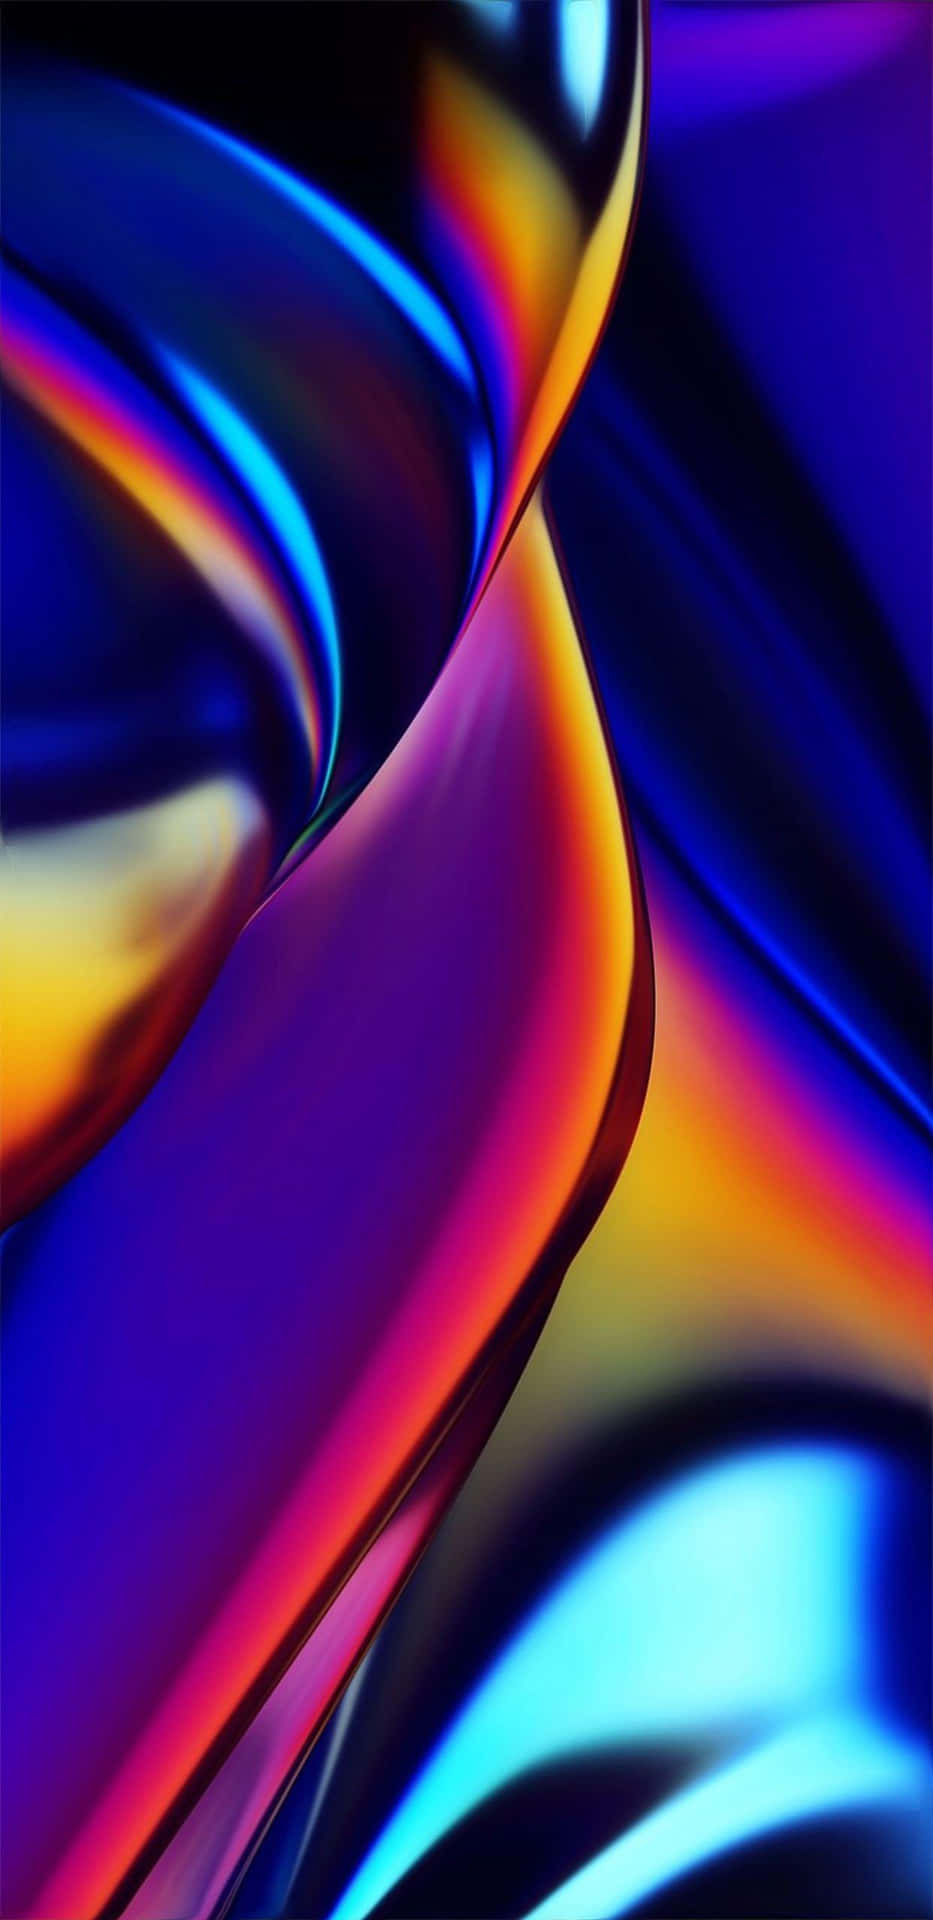 Abstract Colorful Curves Wallpaper